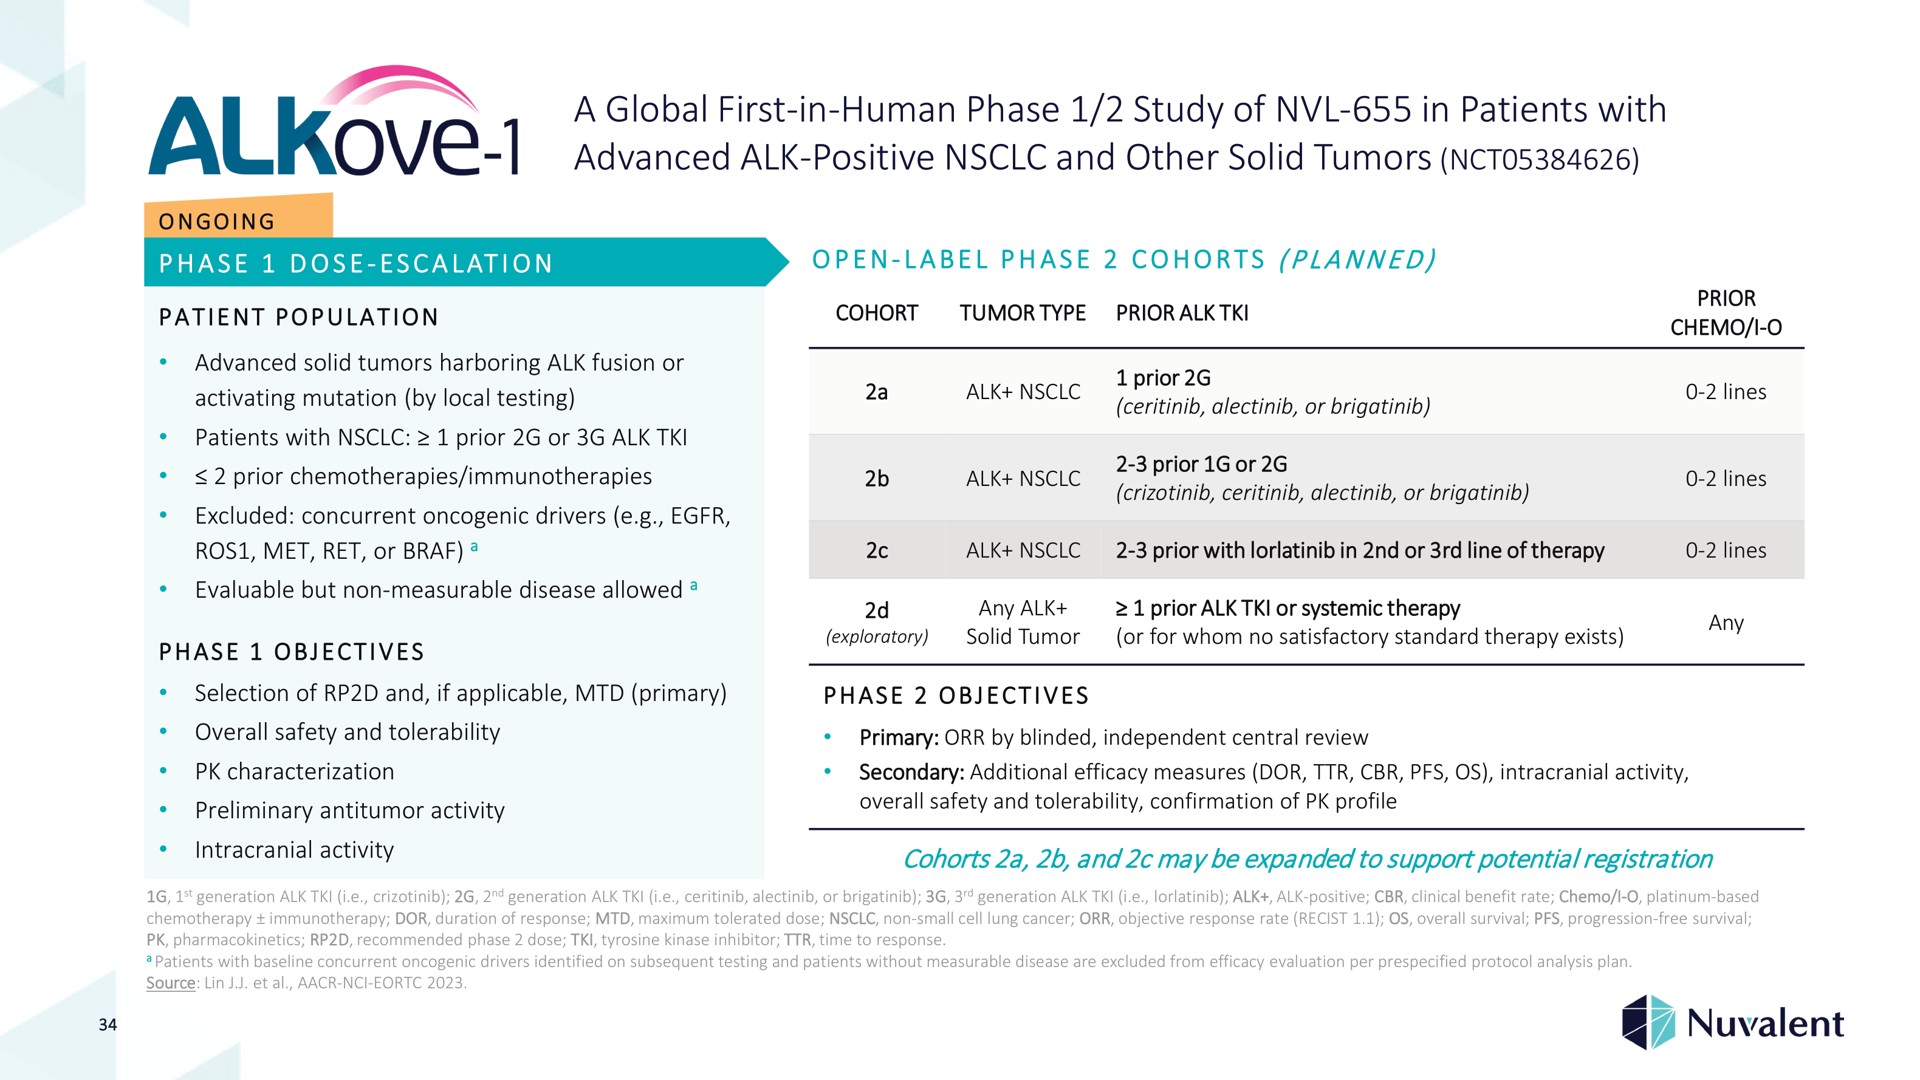 a global first in human phase study of in patients with | Nuvalent